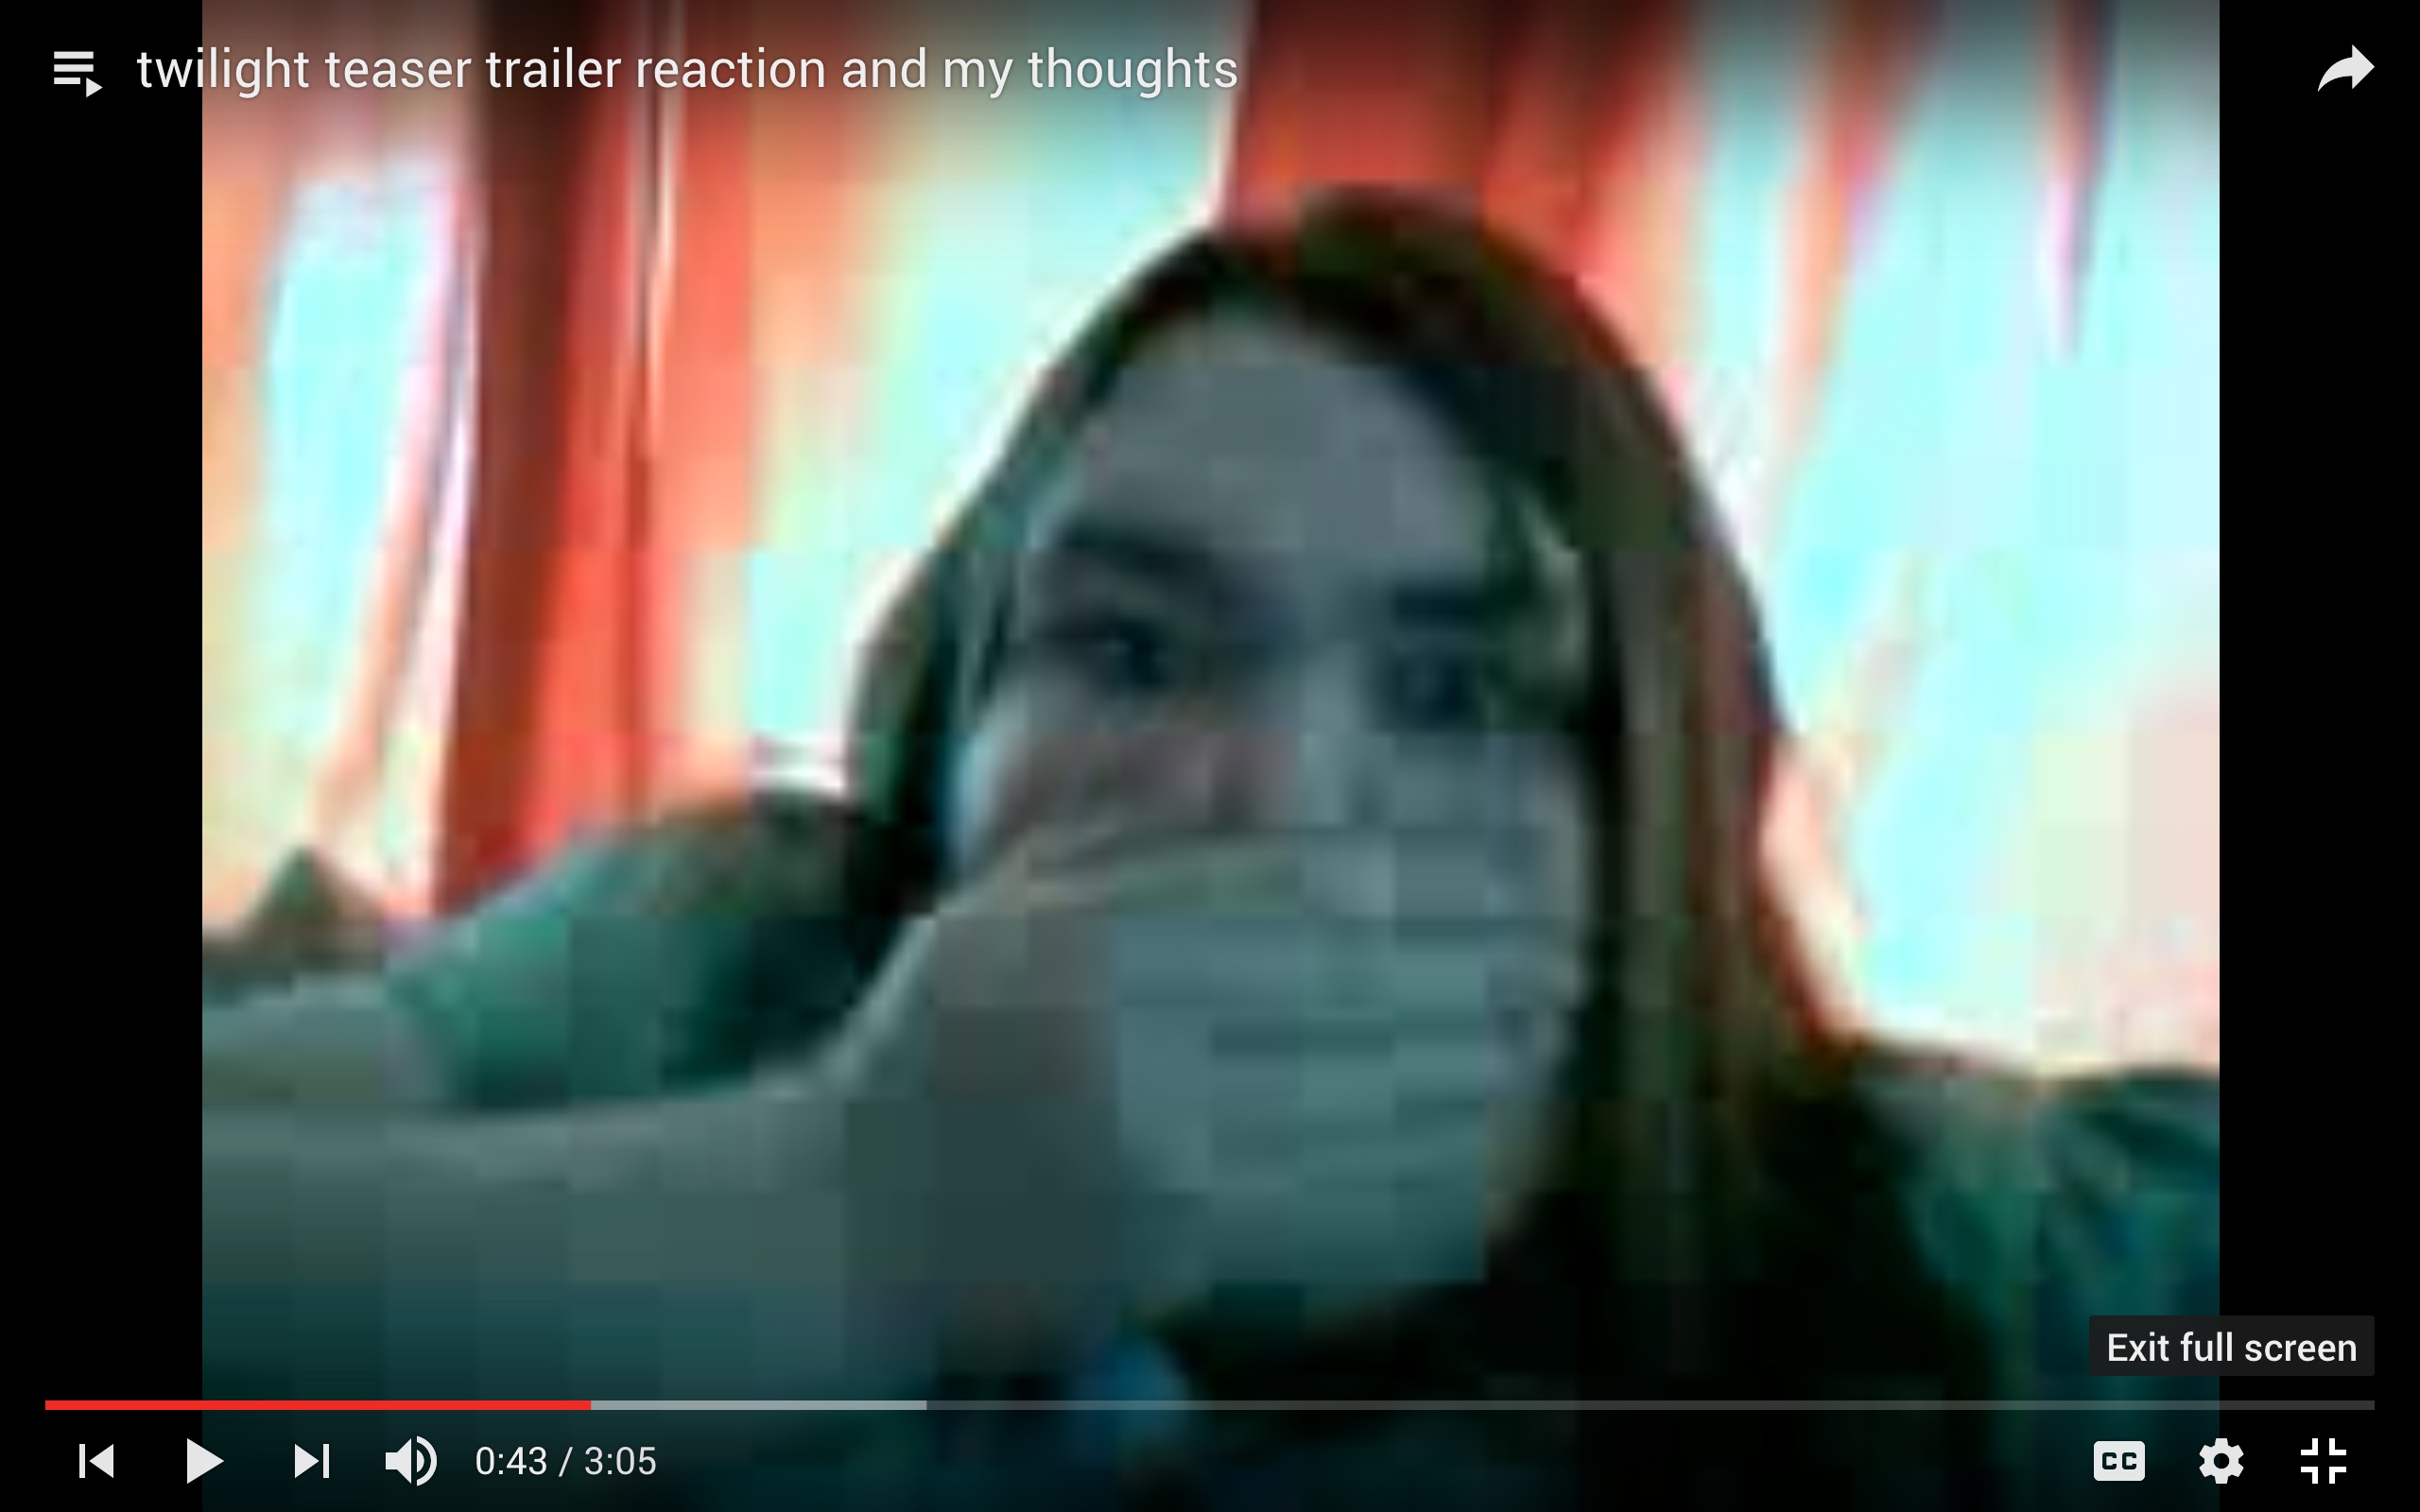 Screen capture of video by Nutty Madam, “twilight teaser trailer reaction and my thoughts” (May 6, 2008) Link